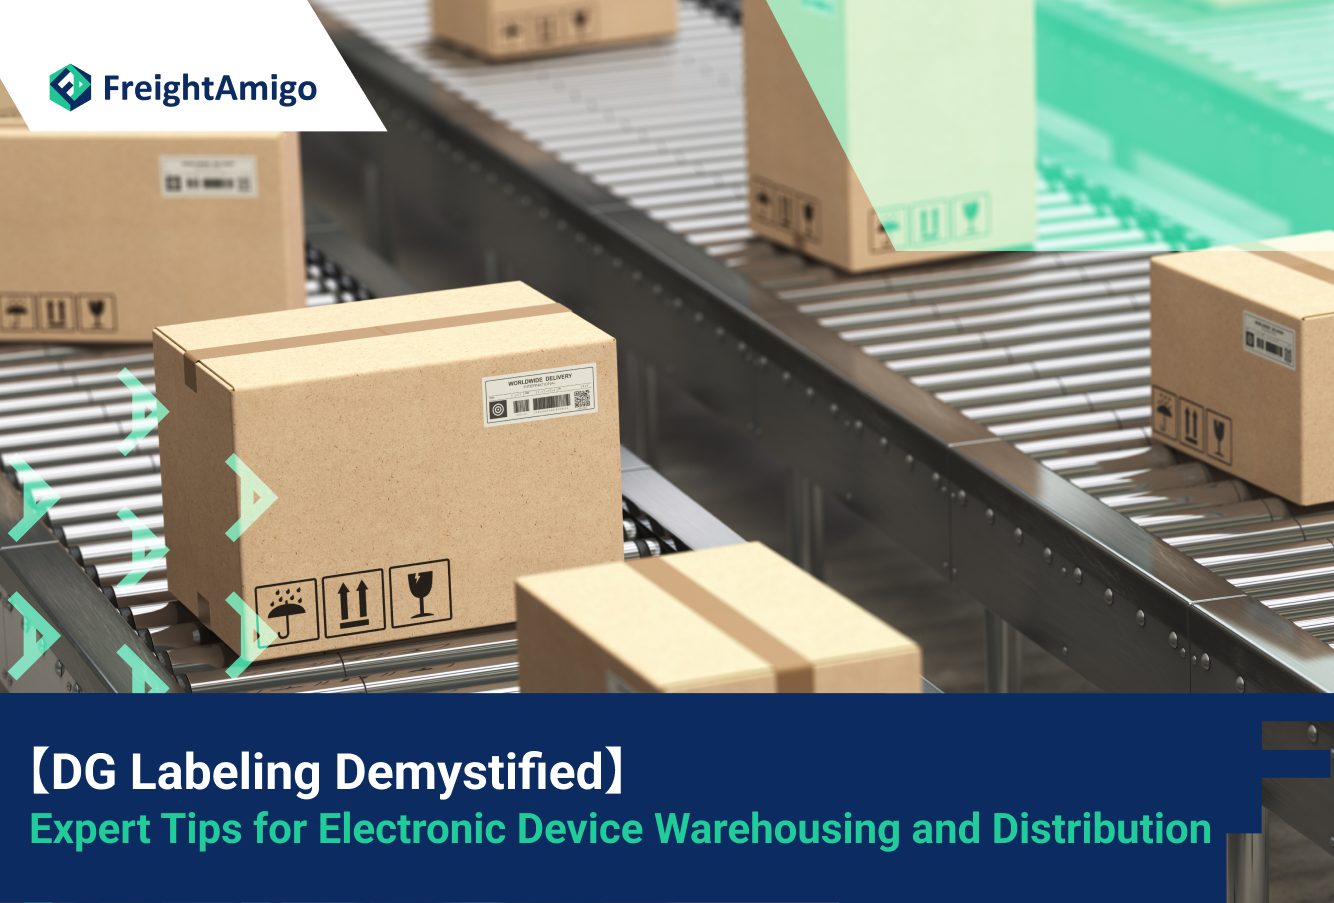 【DG Labeling Demystified】 Expert Tips for Electronic Device Warehousing and Distribution